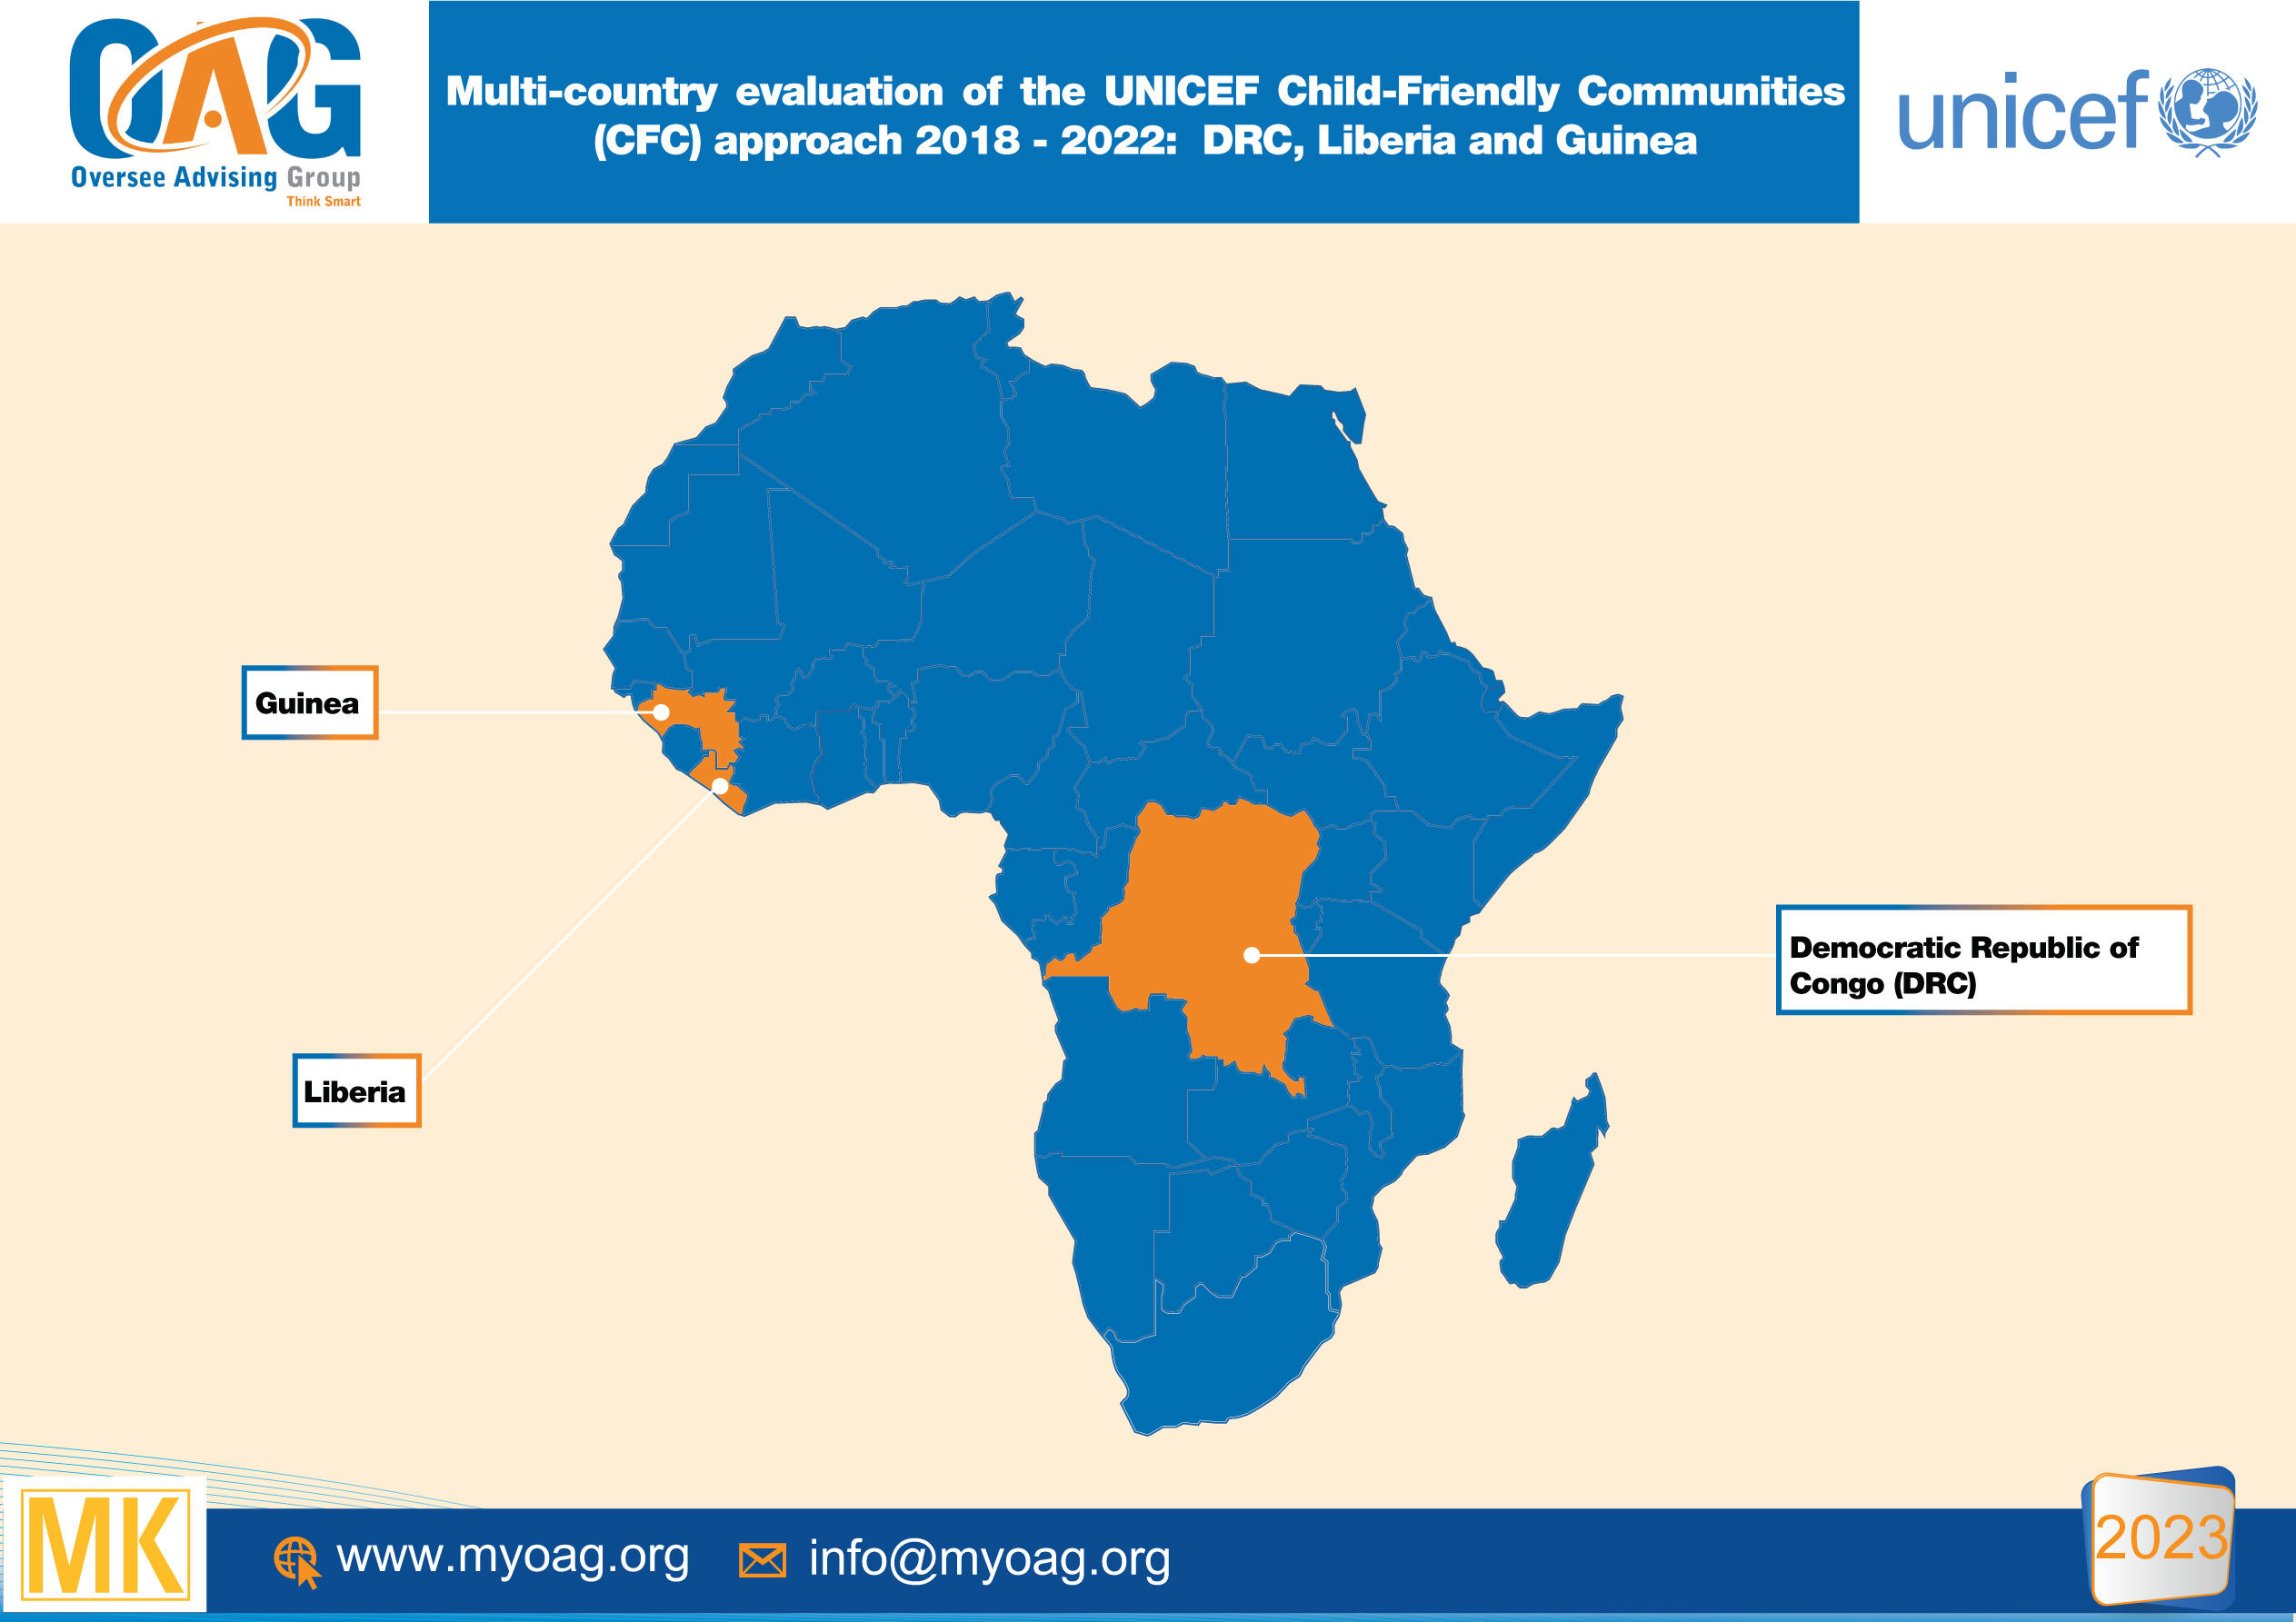 OAG has been awarded the contract for the Multi-country evaluation of the UNICEF Child-Friendly Communities (CFC) approach 2018 - 2022:  DRC, Liberia and Guinea